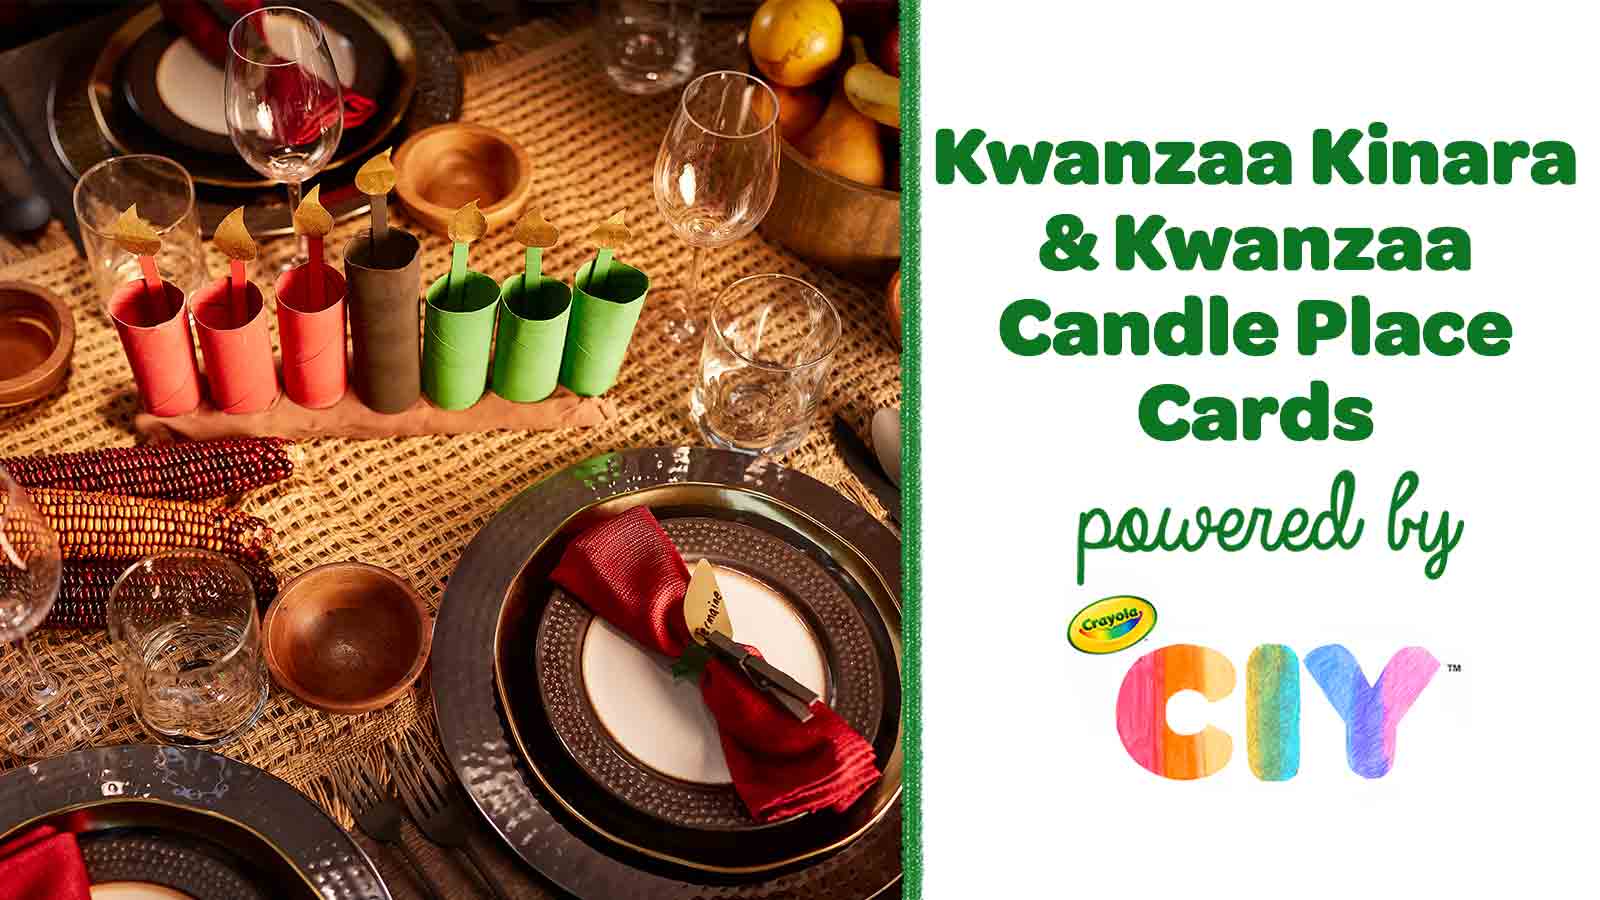 Kwanzaa-Kinara-Candle-Place-Cards_Poster-Frame_Template